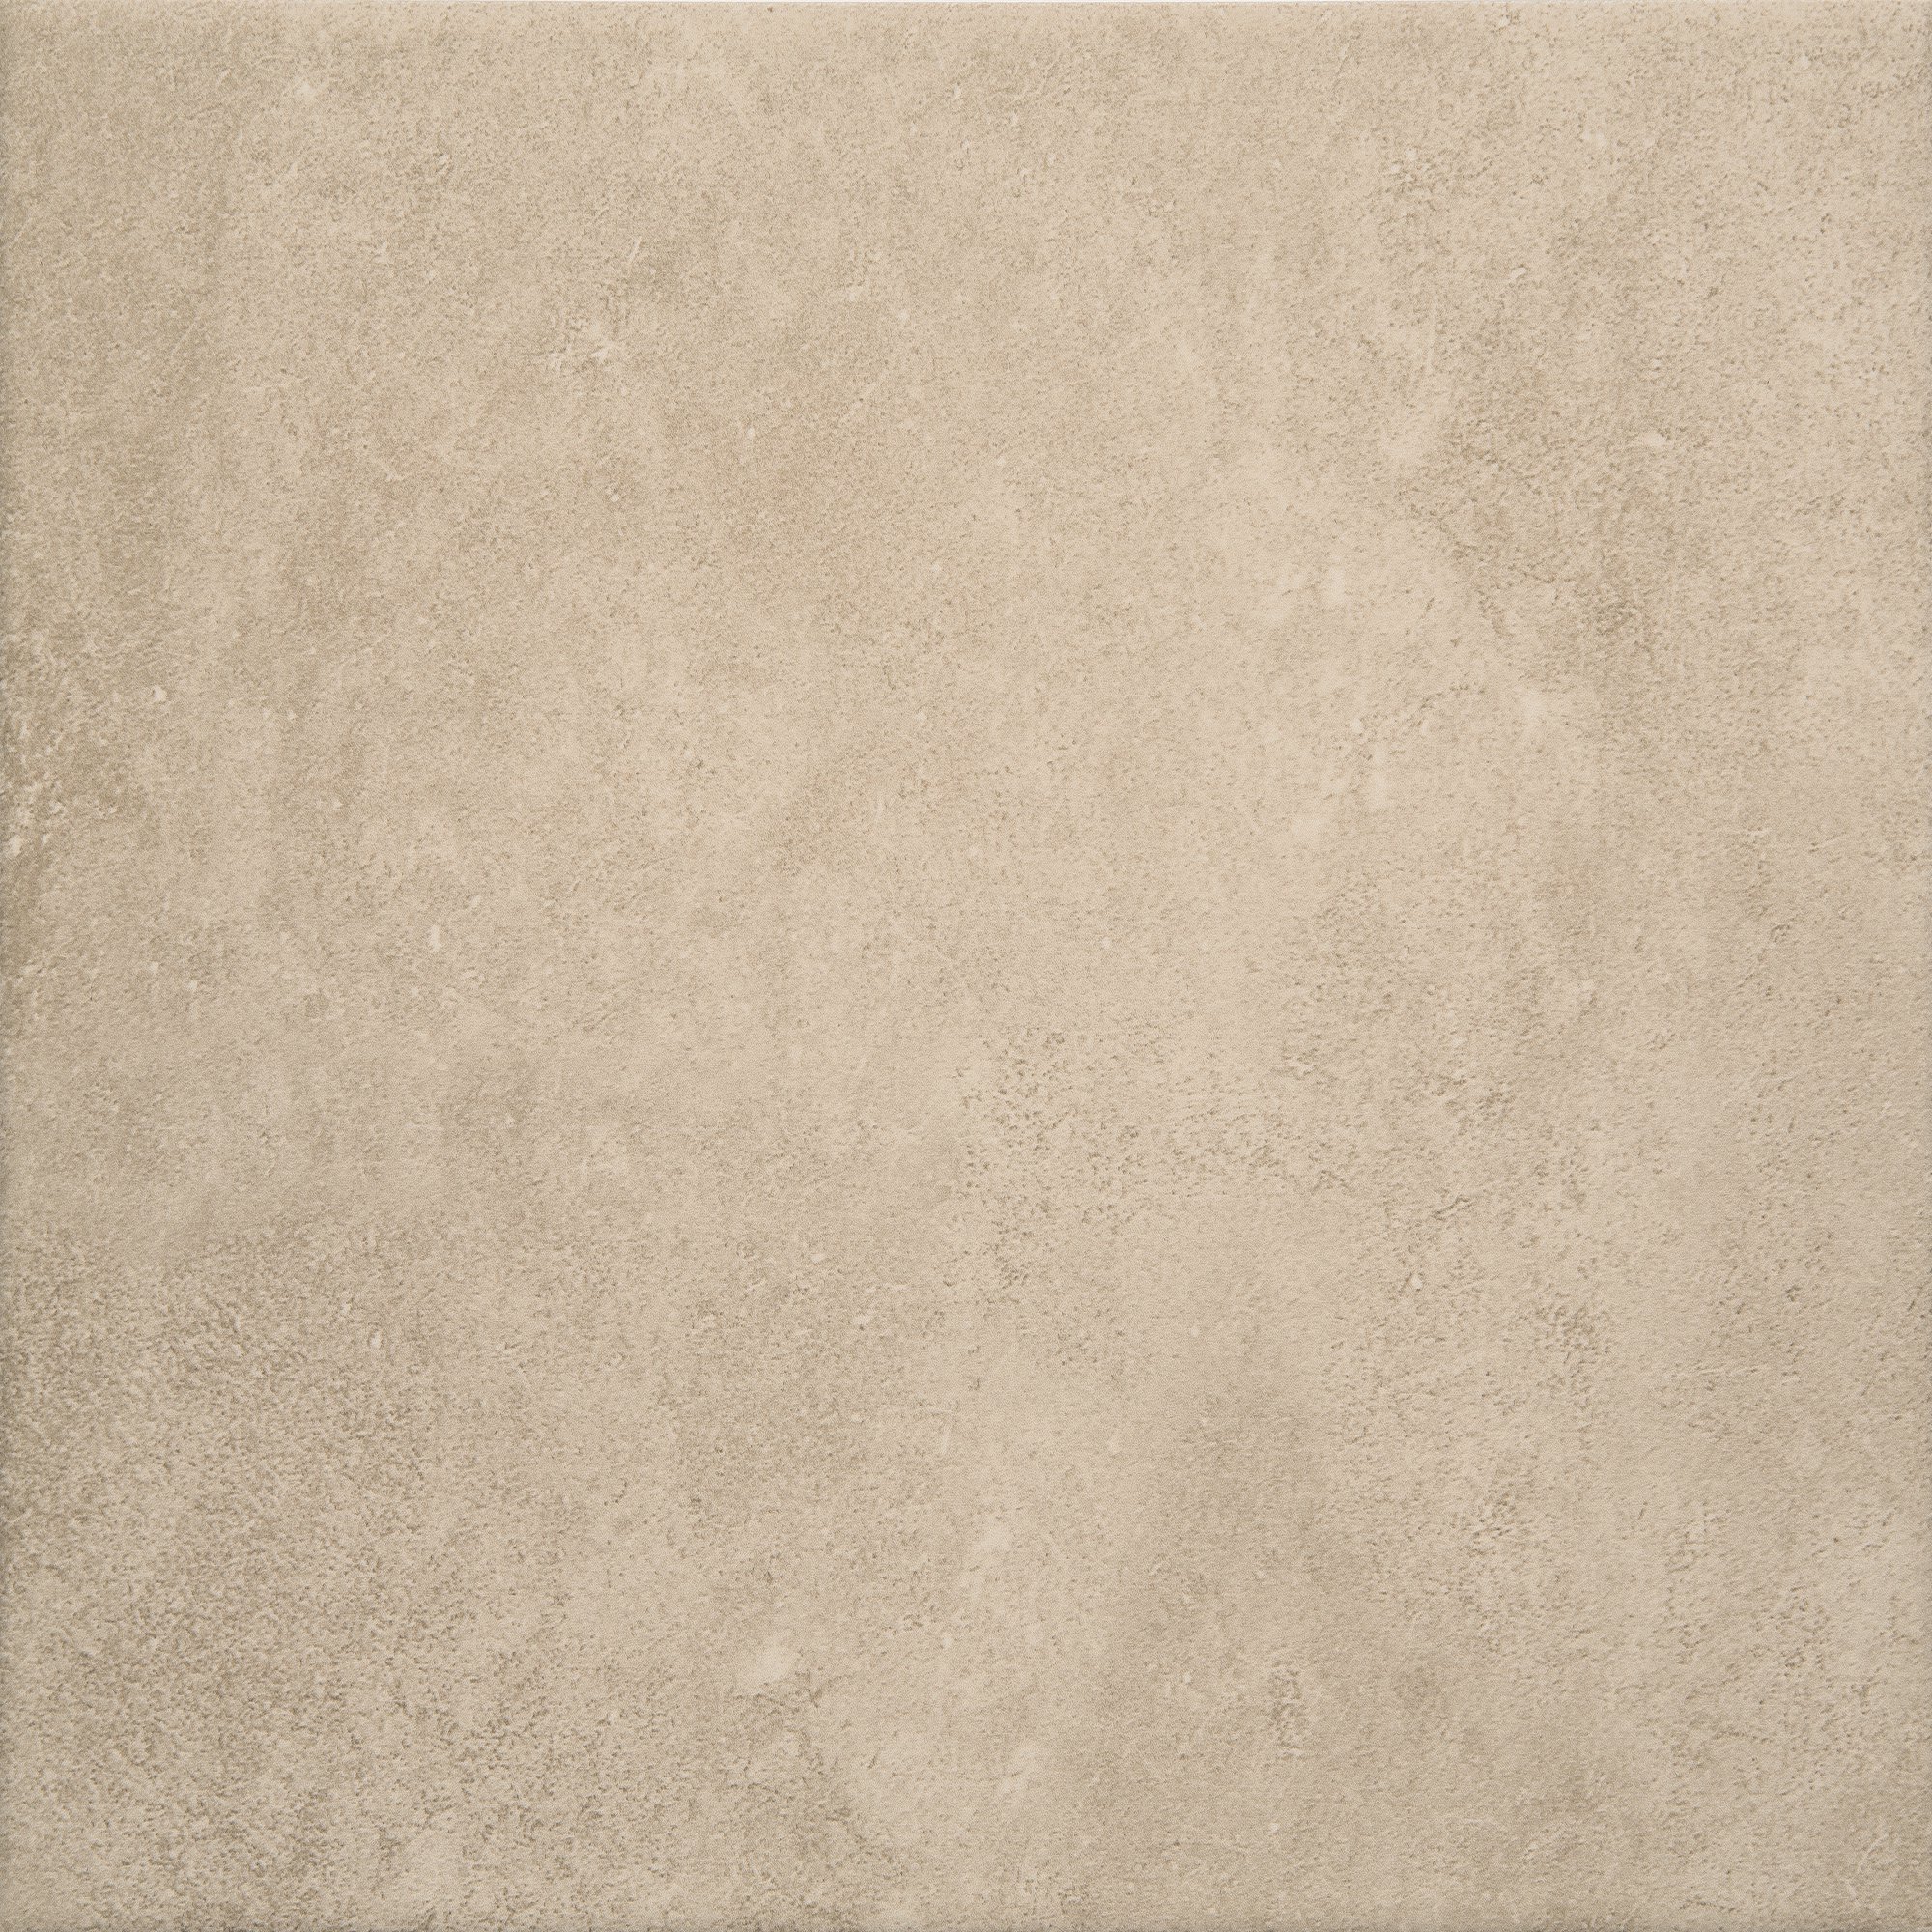 County Rustic Taupe Floor